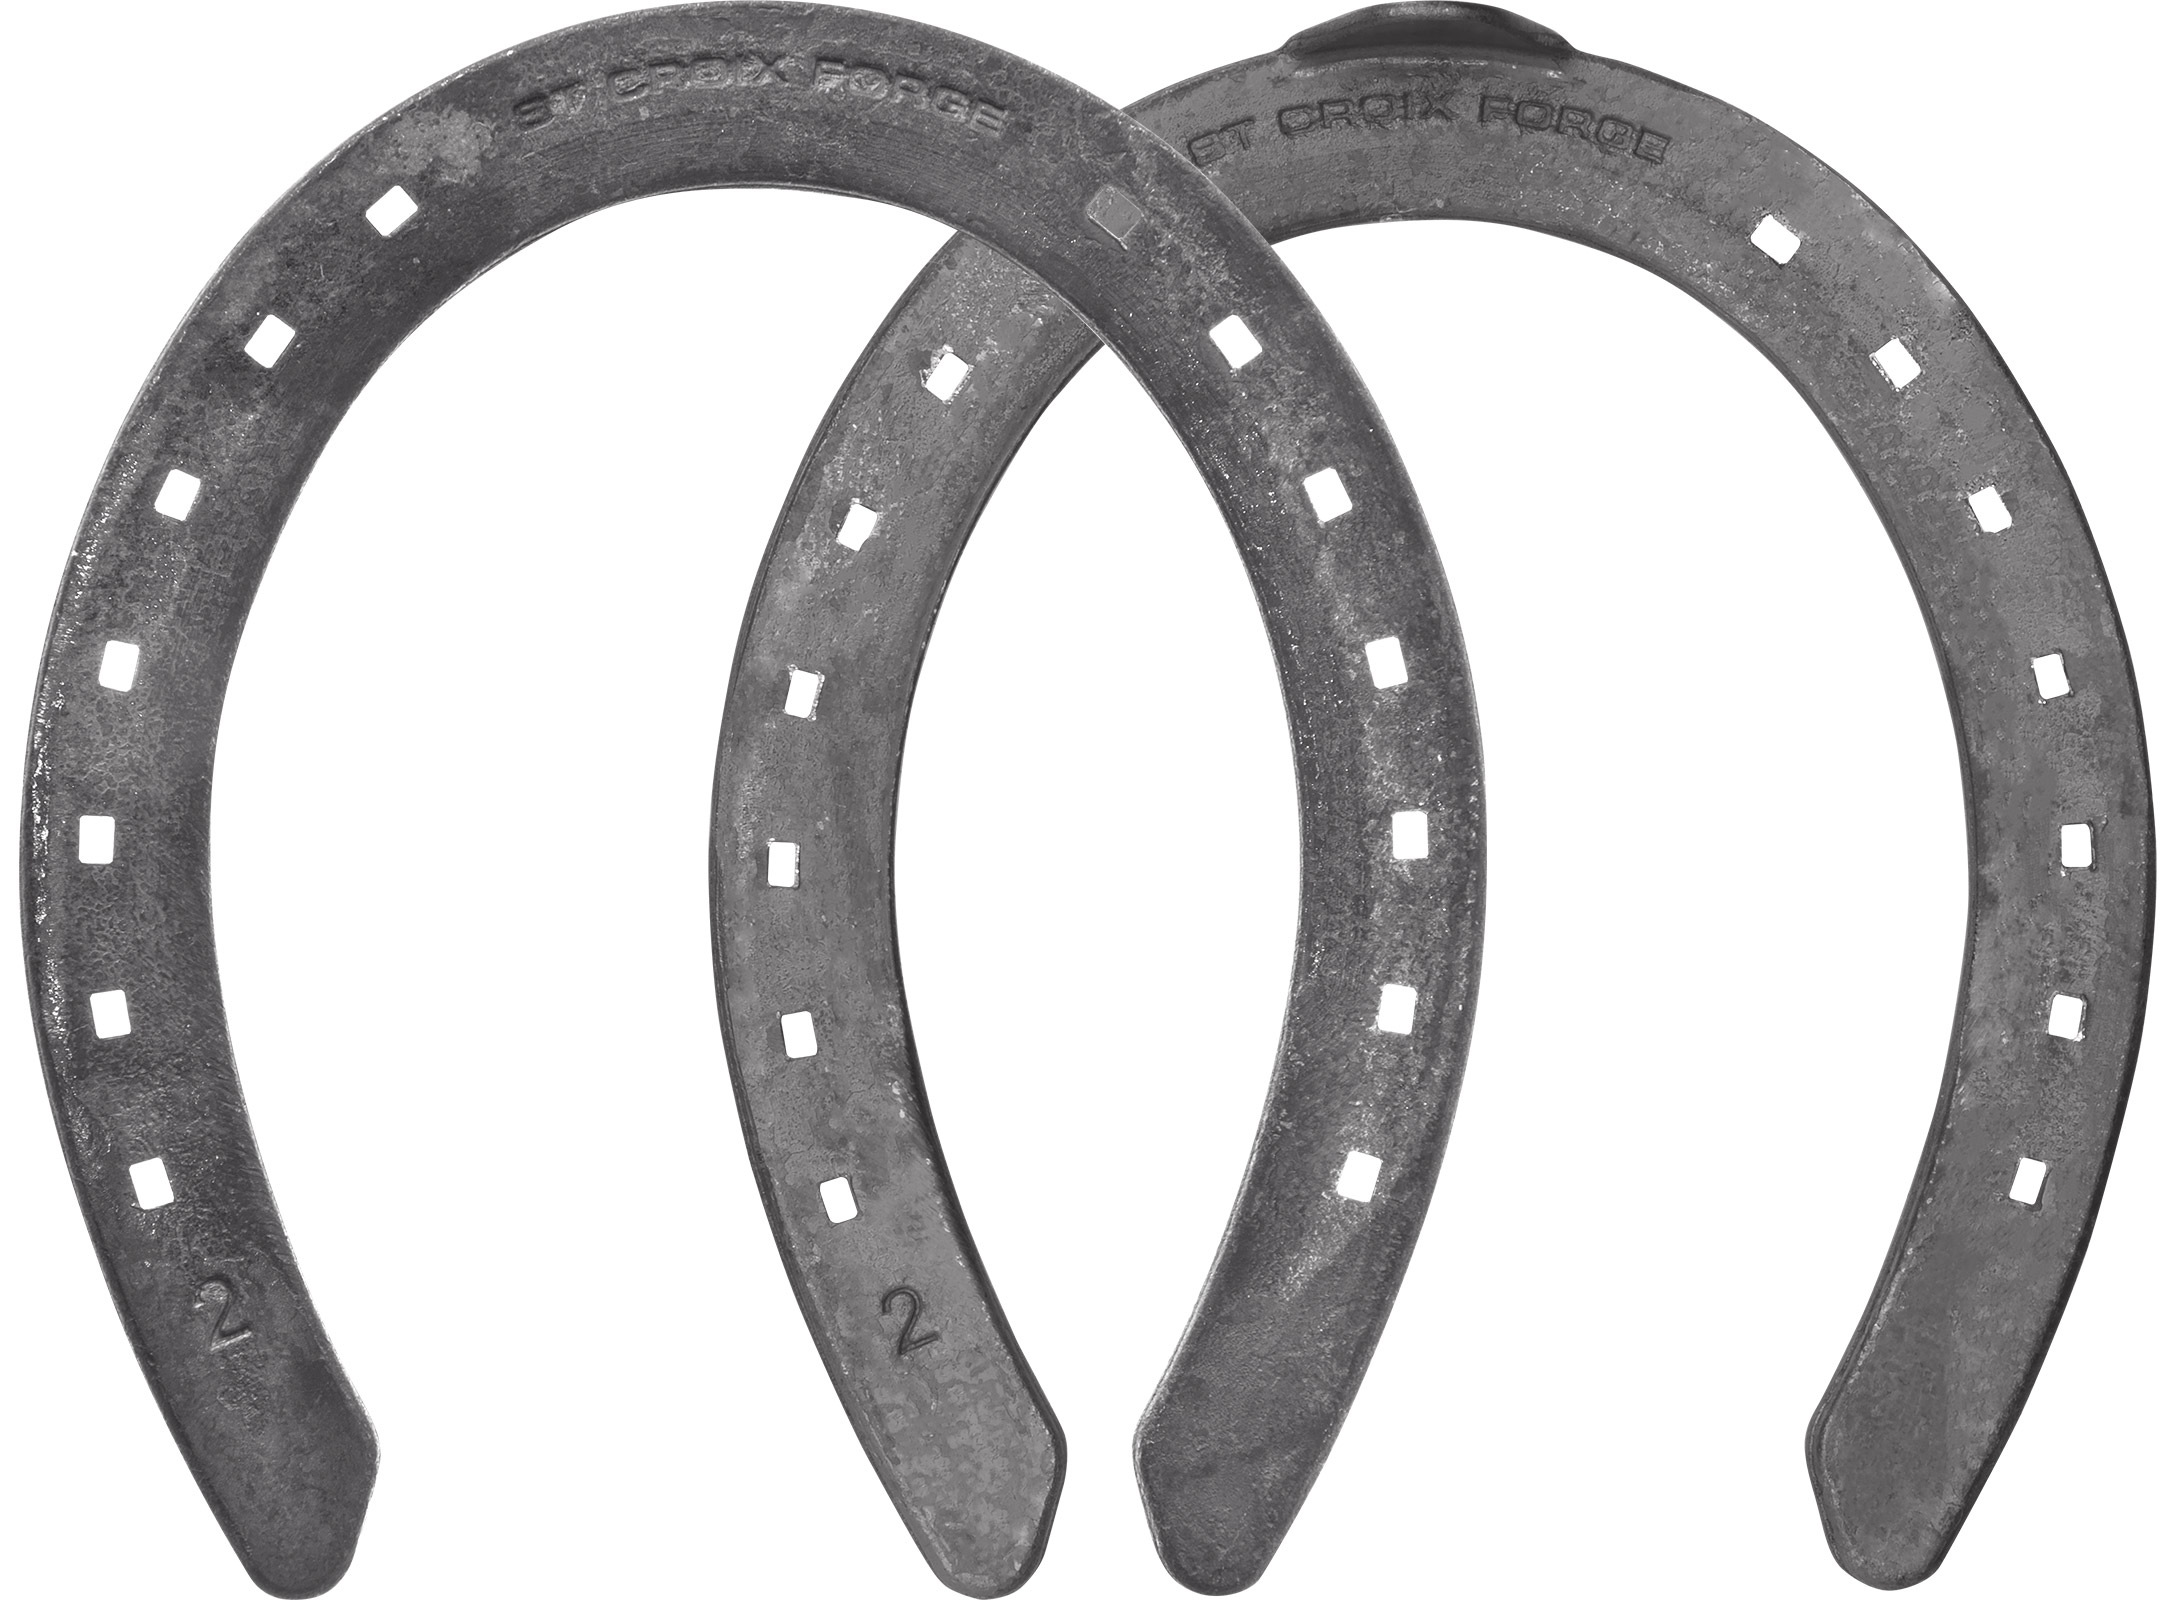 St.Croix Rapid Halfround horseshoes, hind unclipped and toe clip, hoof side view